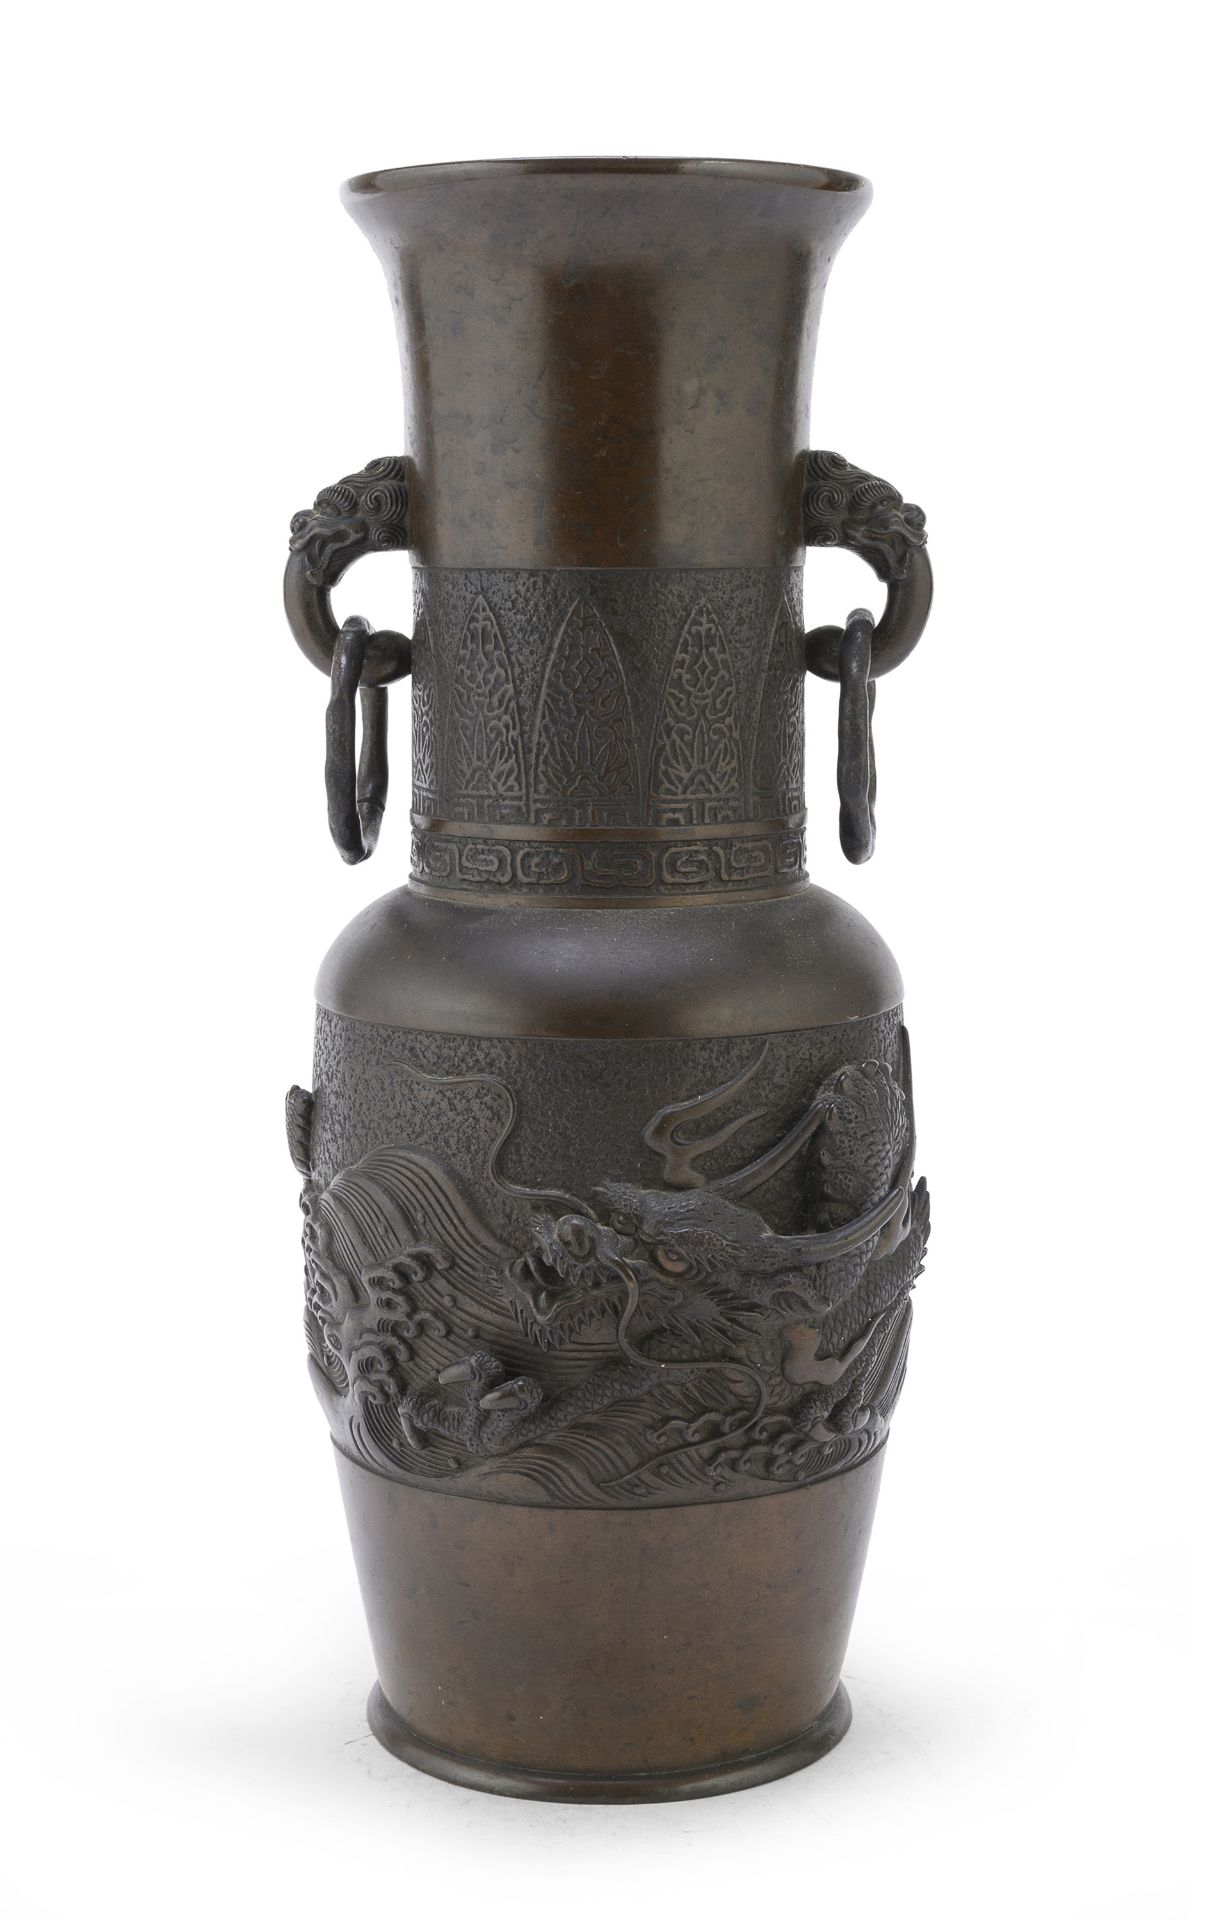 A BRONZE VASE JAPAN LATE 19TH EARLY 20TH CENTURY. GOOD CONDITION OVERALL. HOLE TO BOTTOM.